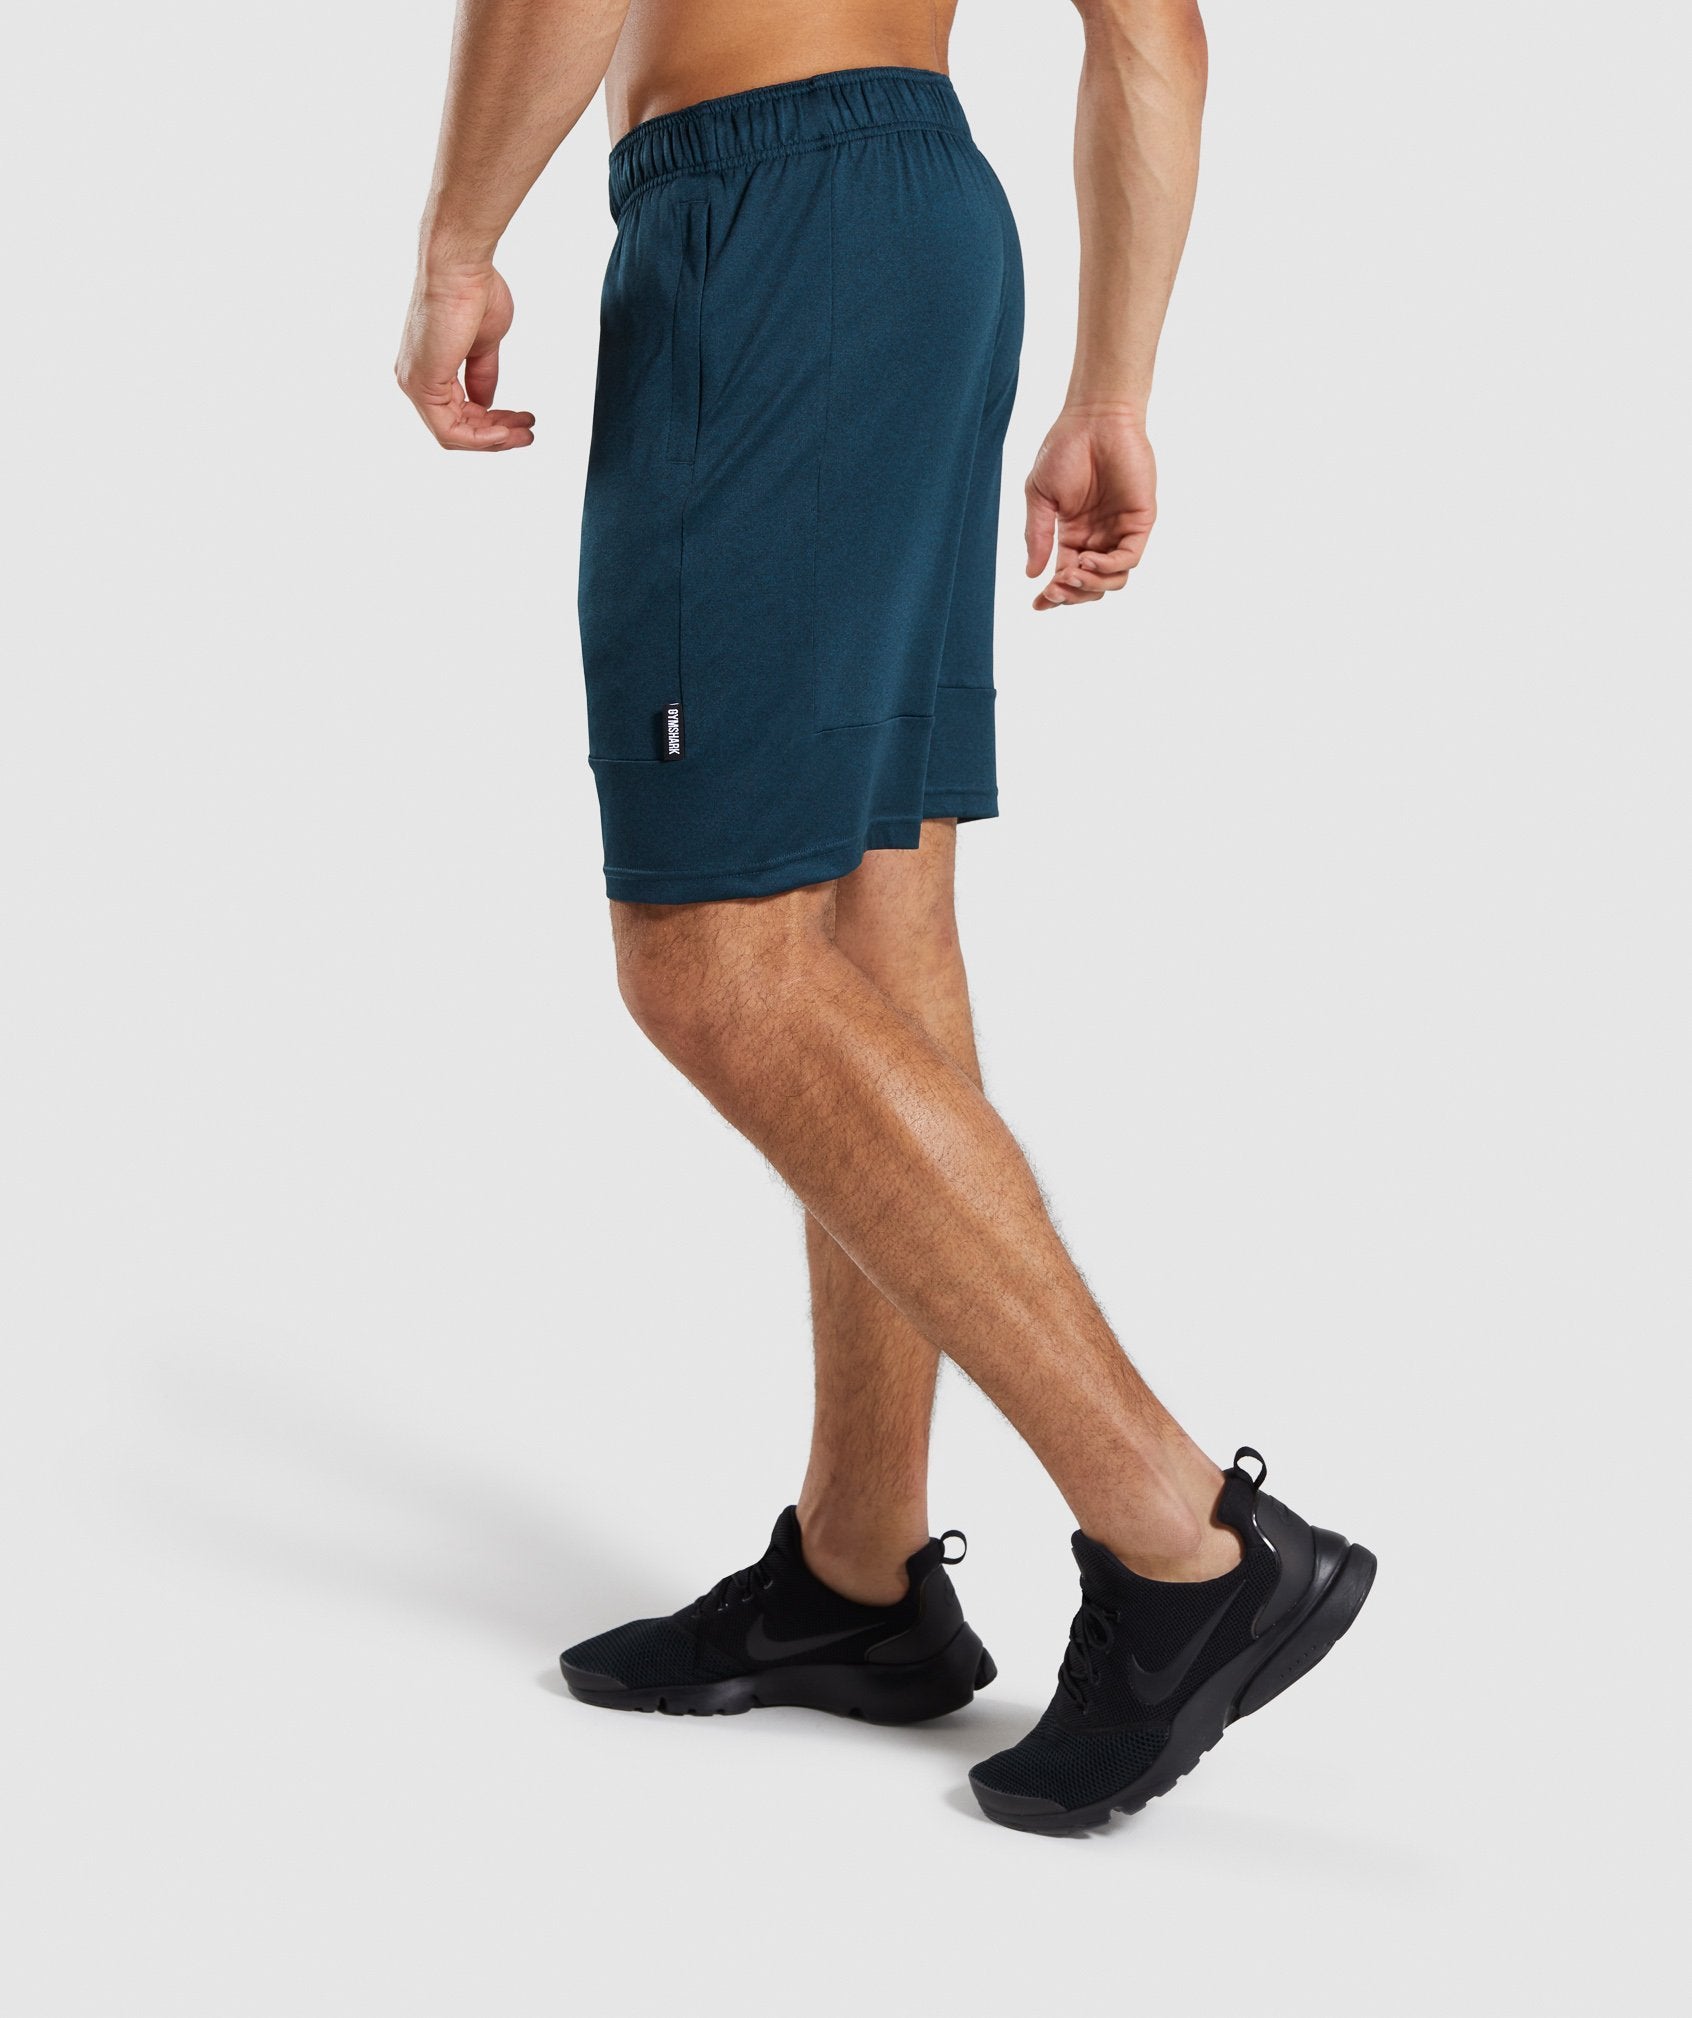 Element Shorts in Teal - view 3